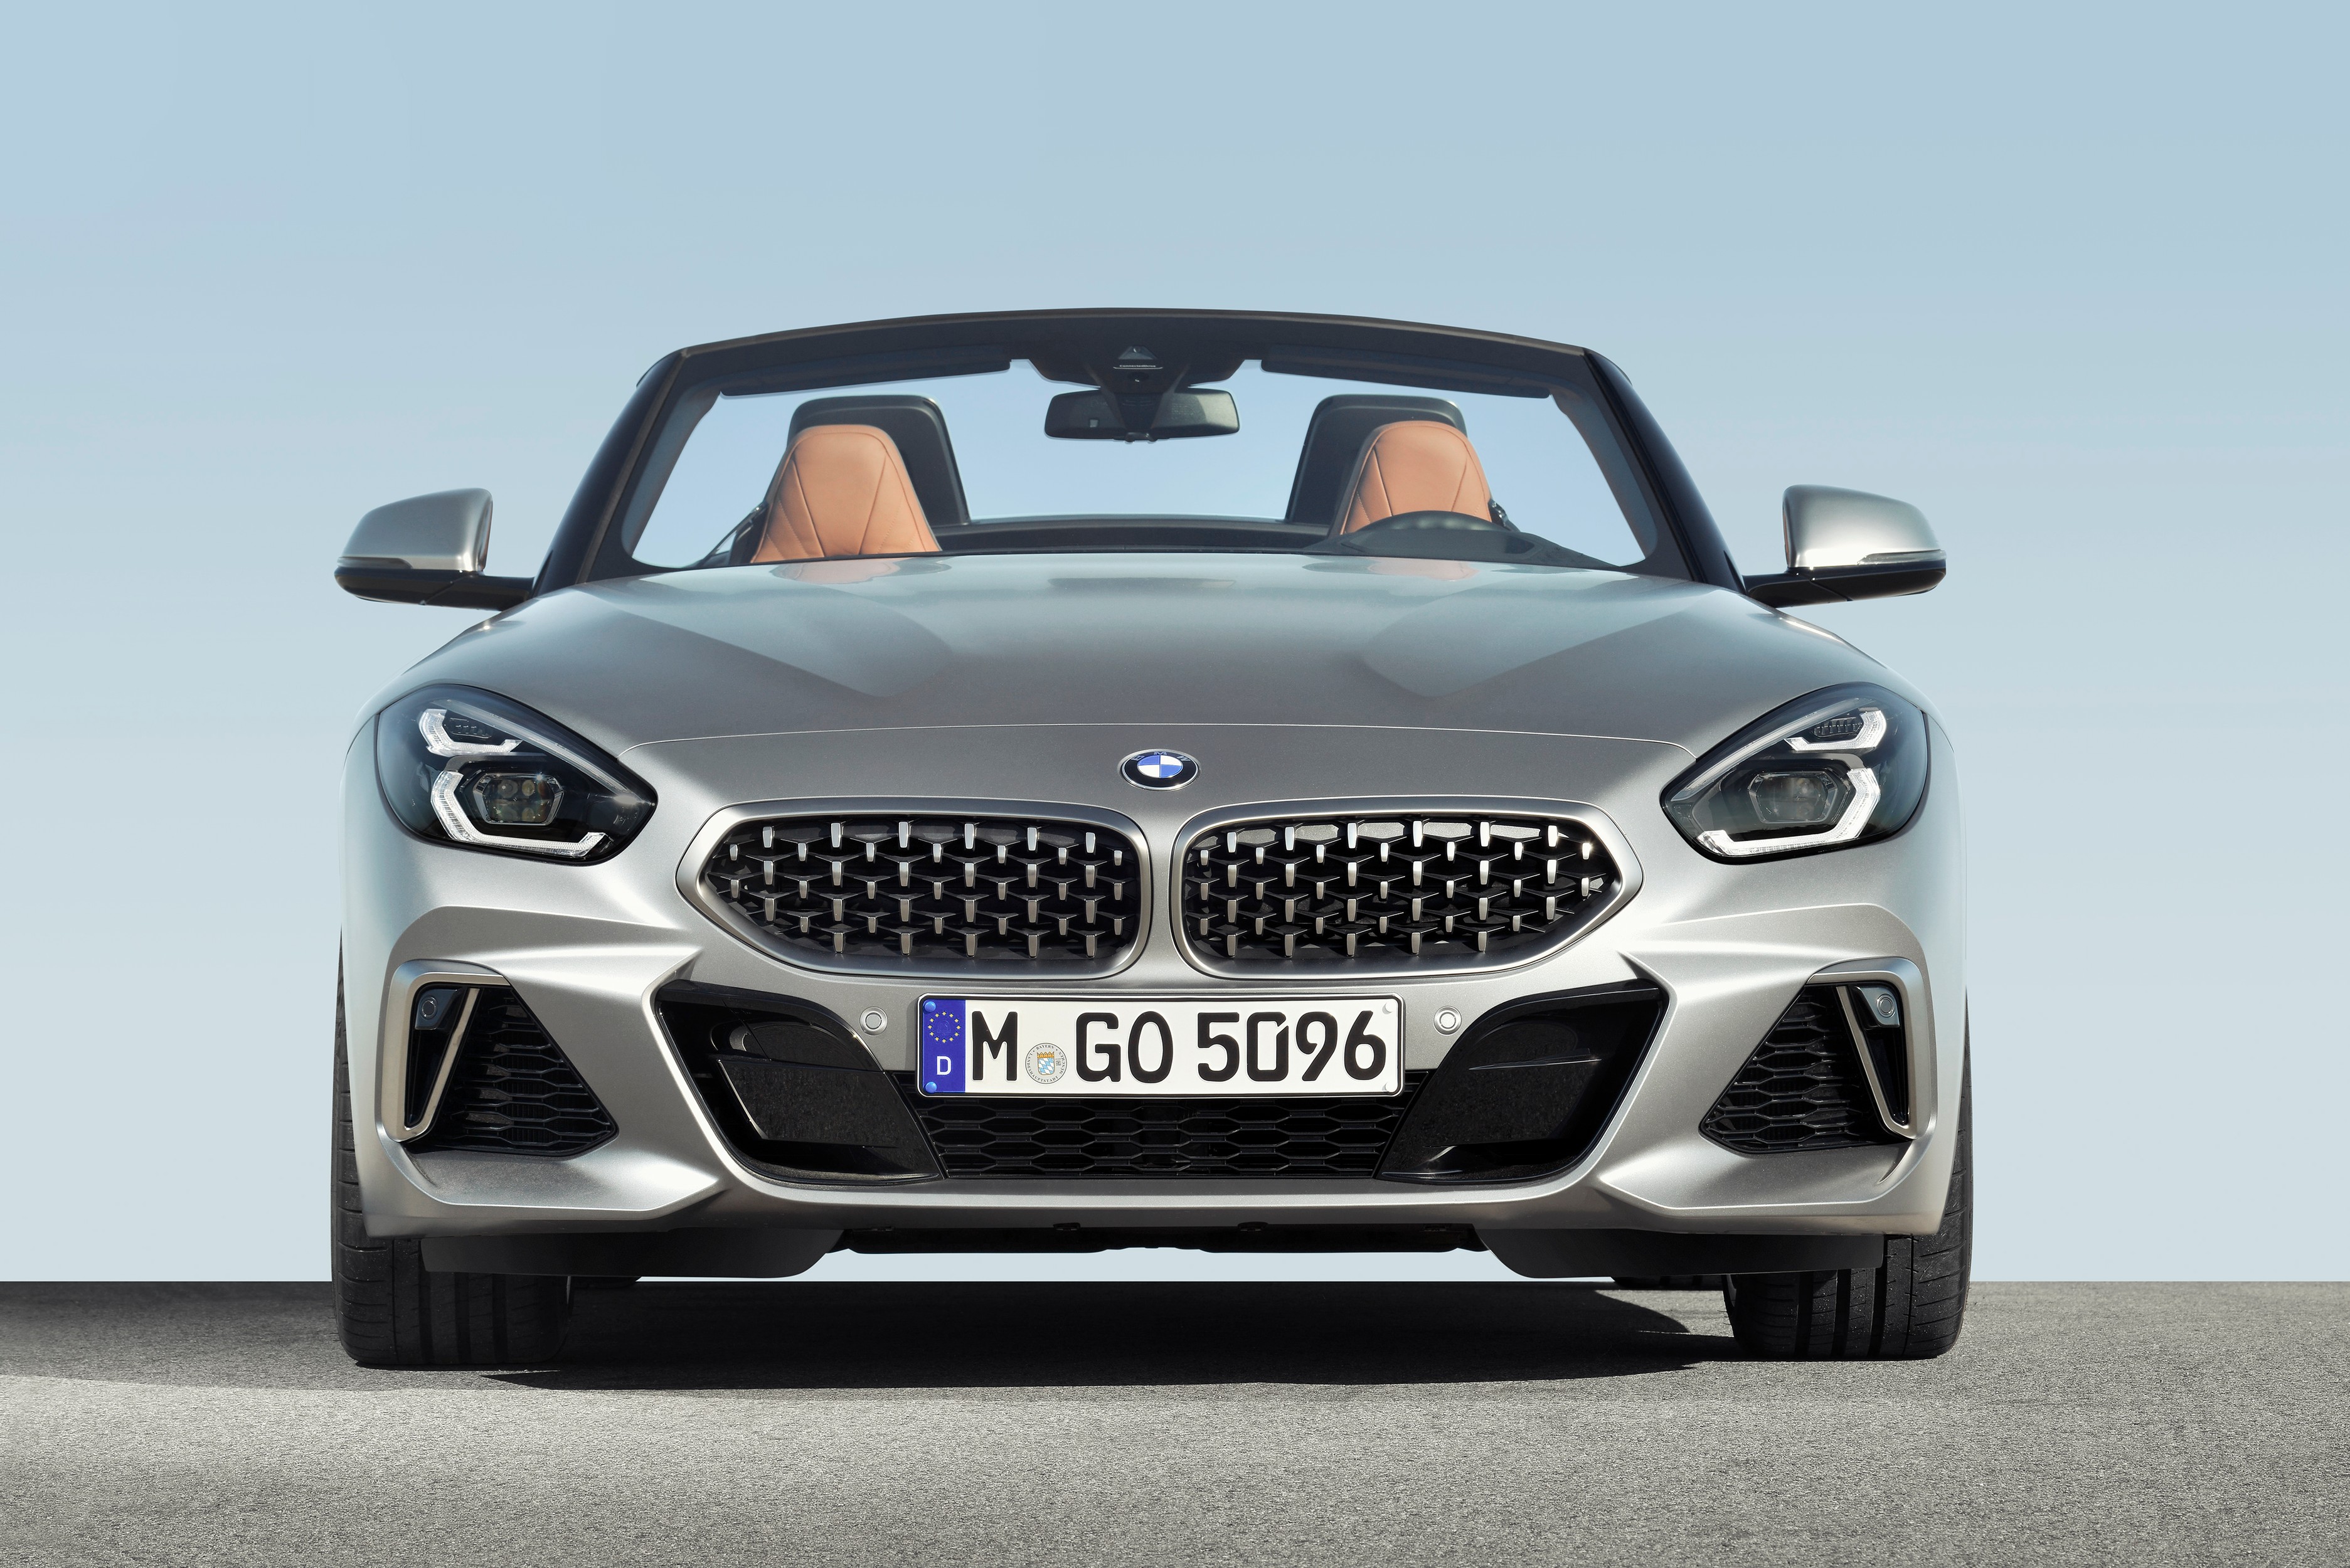 BMW Z4: Comprehensive Guide to Technical Specifications